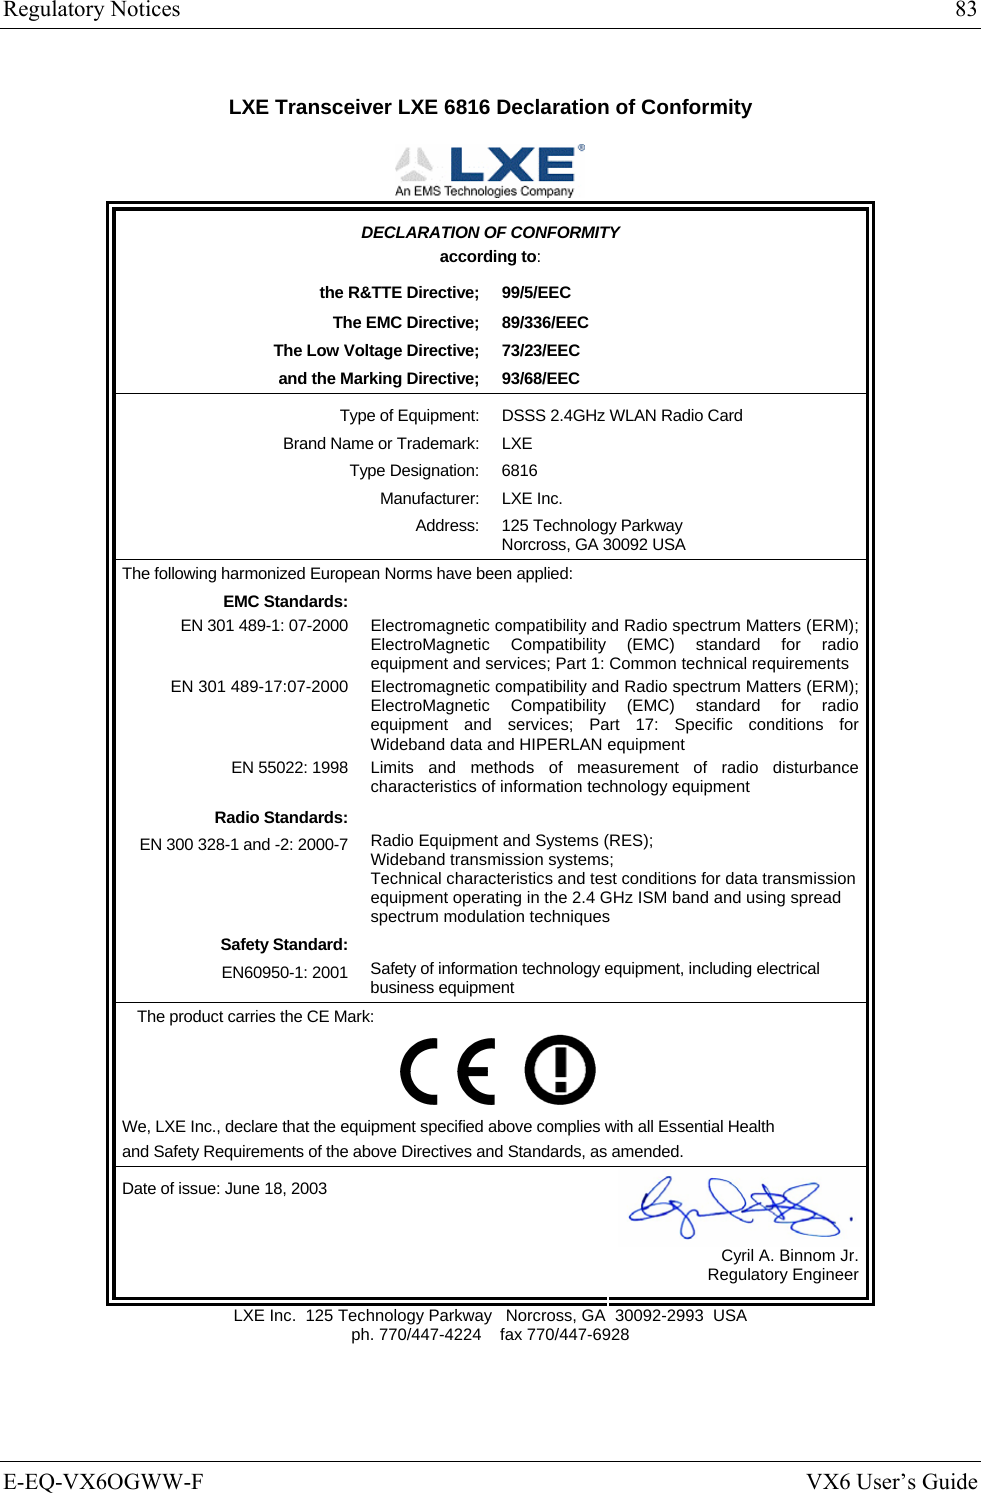 Regulatory Notices  83 E-EQ-VX6OGWW-F  VX6 User’s Guide LXE Transceiver LXE 6816 Declaration of Conformity  DECLARATION OF CONFORMITY according to: the R&amp;TTE Directive;  99/5/EEC The EMC Directive;  89/336/EEC The Low Voltage Directive;  73/23/EEC and the Marking Directive;  93/68/EEC Type of Equipment:  DSSS 2.4GHz WLAN Radio Card Brand Name or Trademark:  LXE Type Designation:  6816 Manufacturer: LXE Inc. Address:  125 Technology Parkway Norcross, GA 30092 USA The following harmonized European Norms have been applied:   EMC Standards:  EN 301 489-1: 07-2000  Electromagnetic compatibility and Radio spectrum Matters (ERM); ElectroMagnetic Compatibility (EMC) standard for radio equipment and services; Part 1: Common technical requirements EN 301 489-17:07-2000  Electromagnetic compatibility and Radio spectrum Matters (ERM); ElectroMagnetic Compatibility (EMC) standard for radio equipment and services; Part 17: Specific conditions for Wideband data and HIPERLAN equipment EN 55022: 1998 Limits and methods of measurement of radio disturbance characteristics of information technology equipment Radio Standards:  EN 300 328-1 and -2: 2000-7 Radio Equipment and Systems (RES); Wideband transmission systems; Technical characteristics and test conditions for data transmission equipment operating in the 2.4 GHz ISM band and using spread spectrum modulation techniques Safety Standard:  EN60950-1: 2001 Safety of information technology equipment, including electrical business equipment The product carries the CE Mark:         We, LXE Inc., declare that the equipment specified above complies with all Essential Health  and Safety Requirements of the above Directives and Standards, as amended. Date of issue: June 18, 2003  Cyril A. Binnom Jr. Regulatory Engineer LXE Inc.  125 Technology Parkway   Norcross, GA  30092-2993  USA ph. 770/447-4224    fax 770/447-6928 